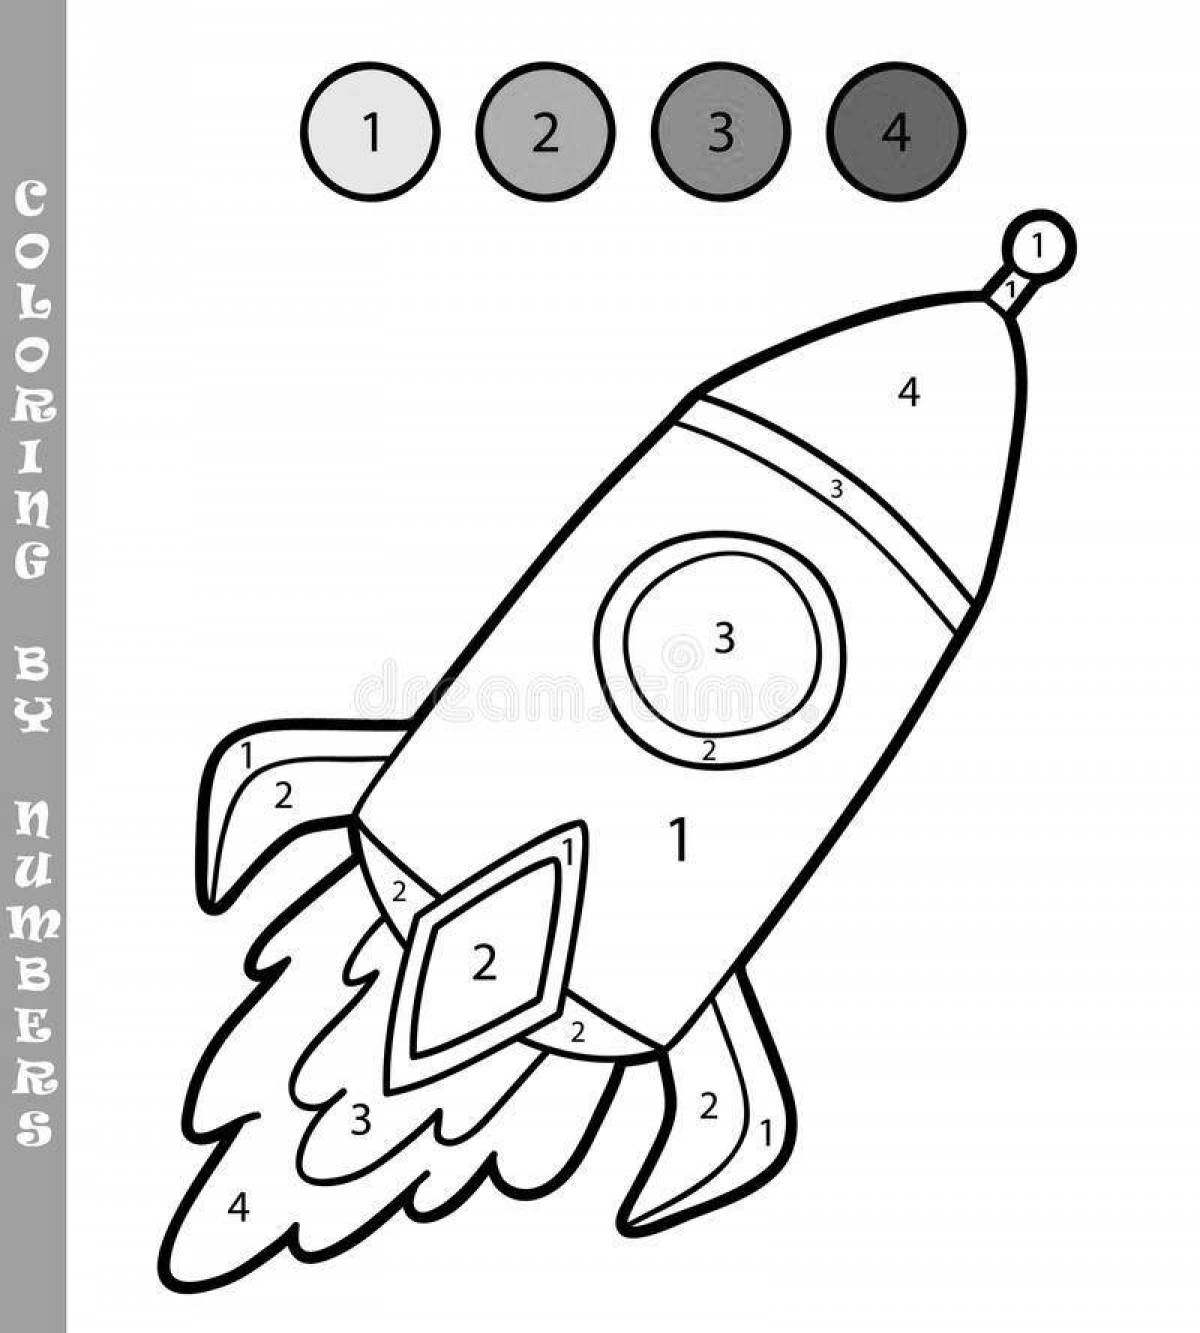 Coloring rocket for children 6-7 years old